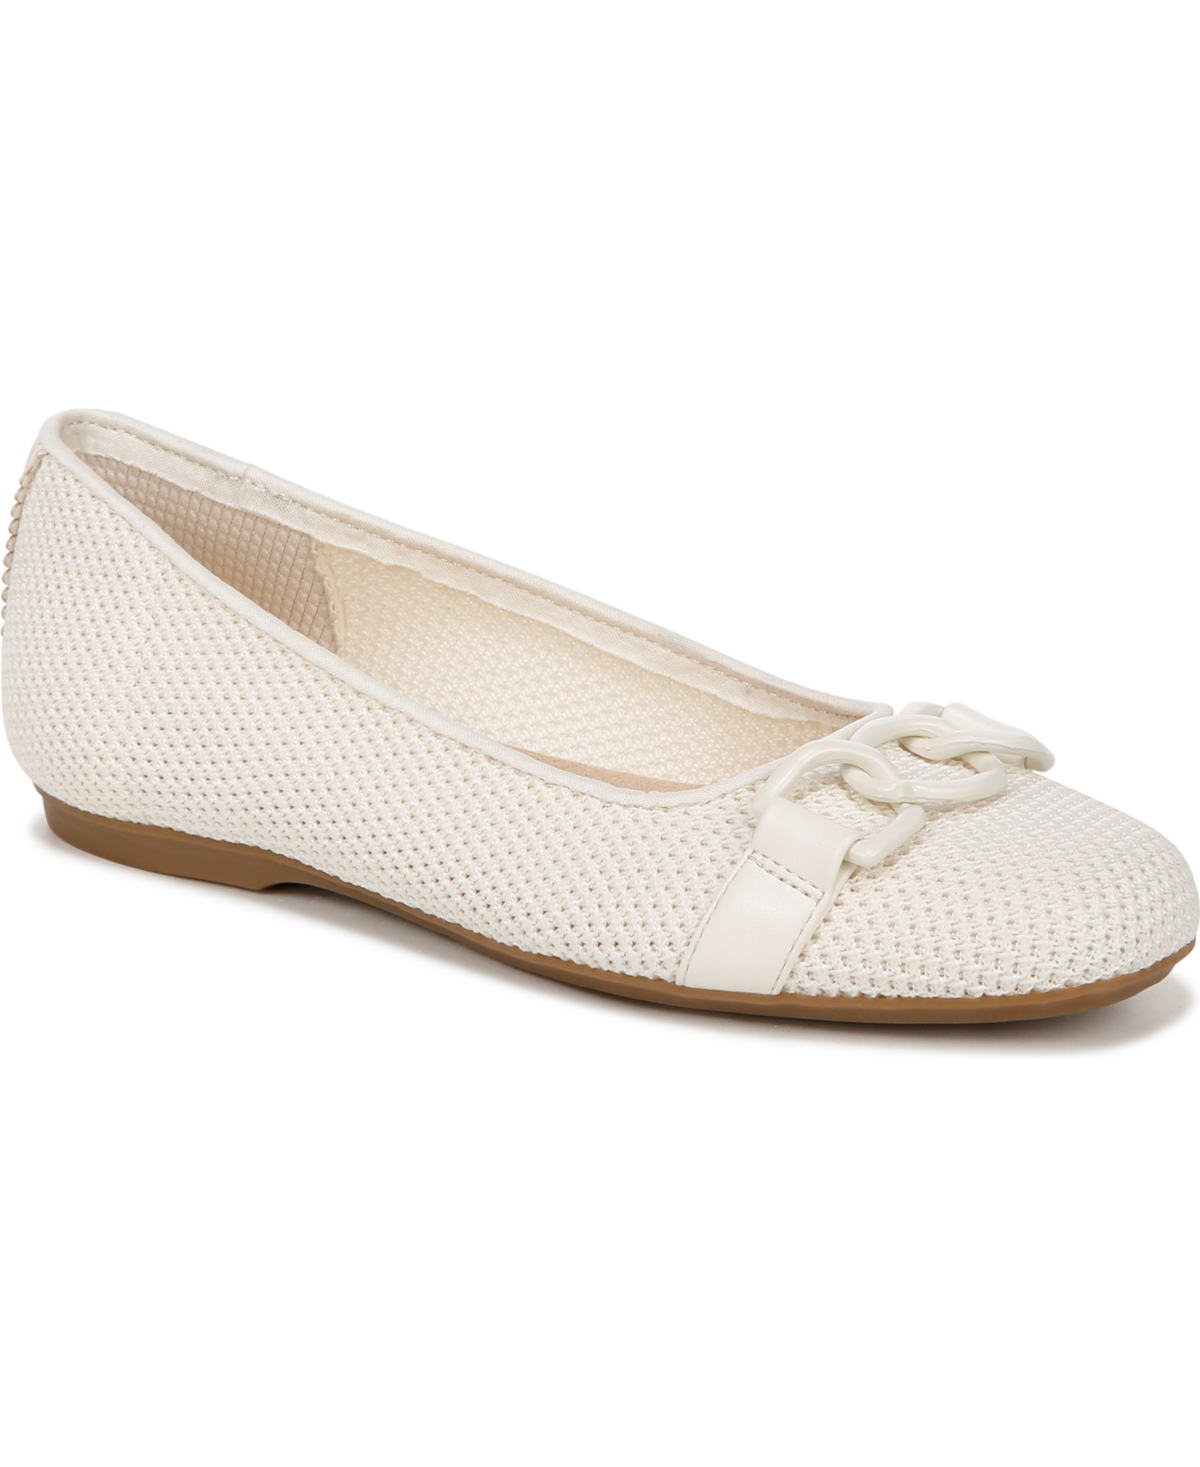 Dr. Scholl's Women's Wexley Adorn Flats In Off,white Knit Fabric,faux Leather